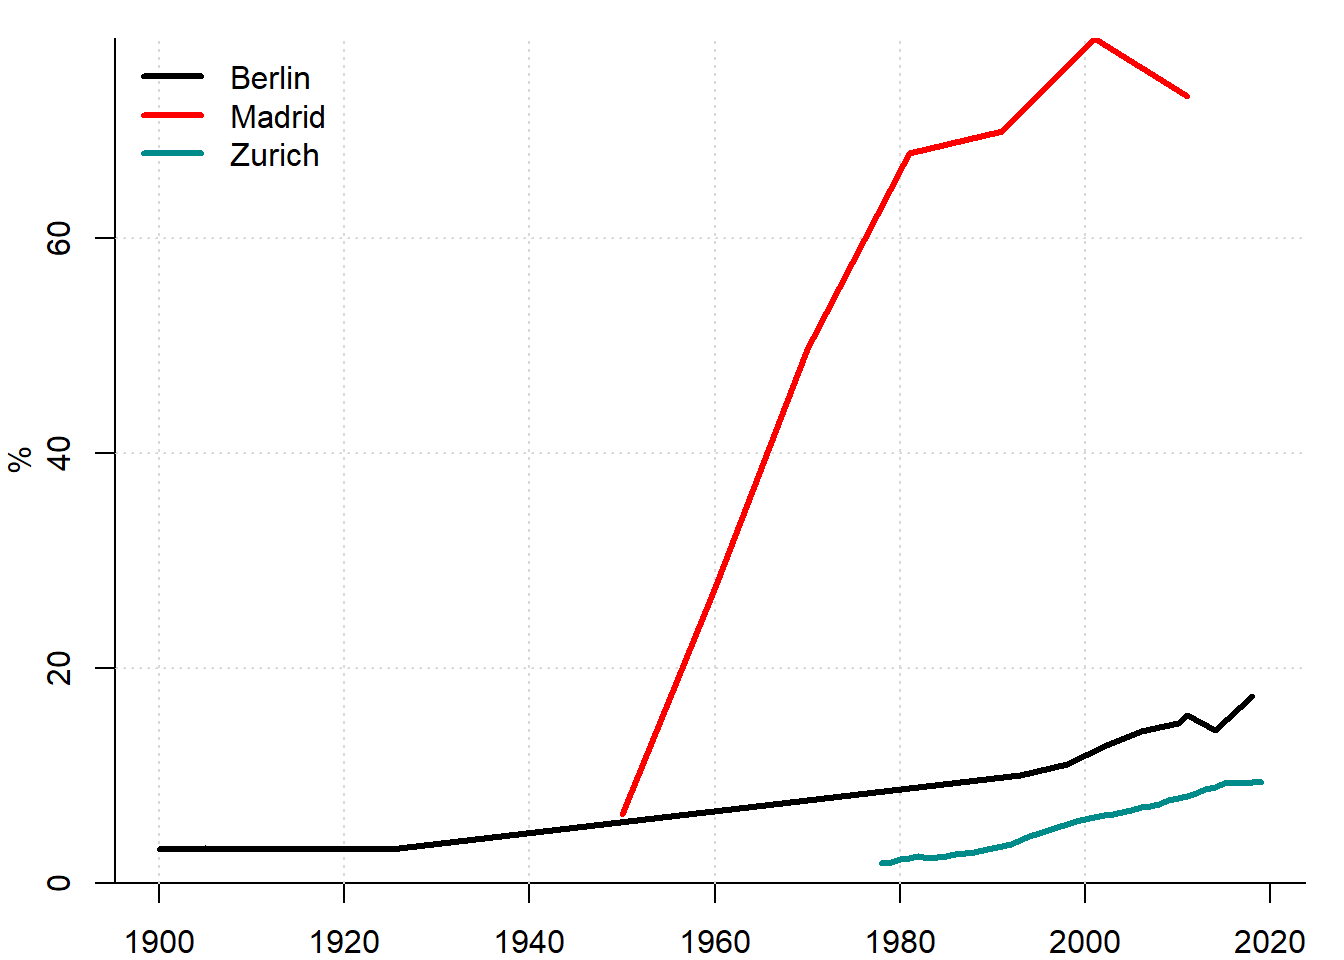 Homeownership rate in Berlin, Madrid and Zurich, 1900--2019